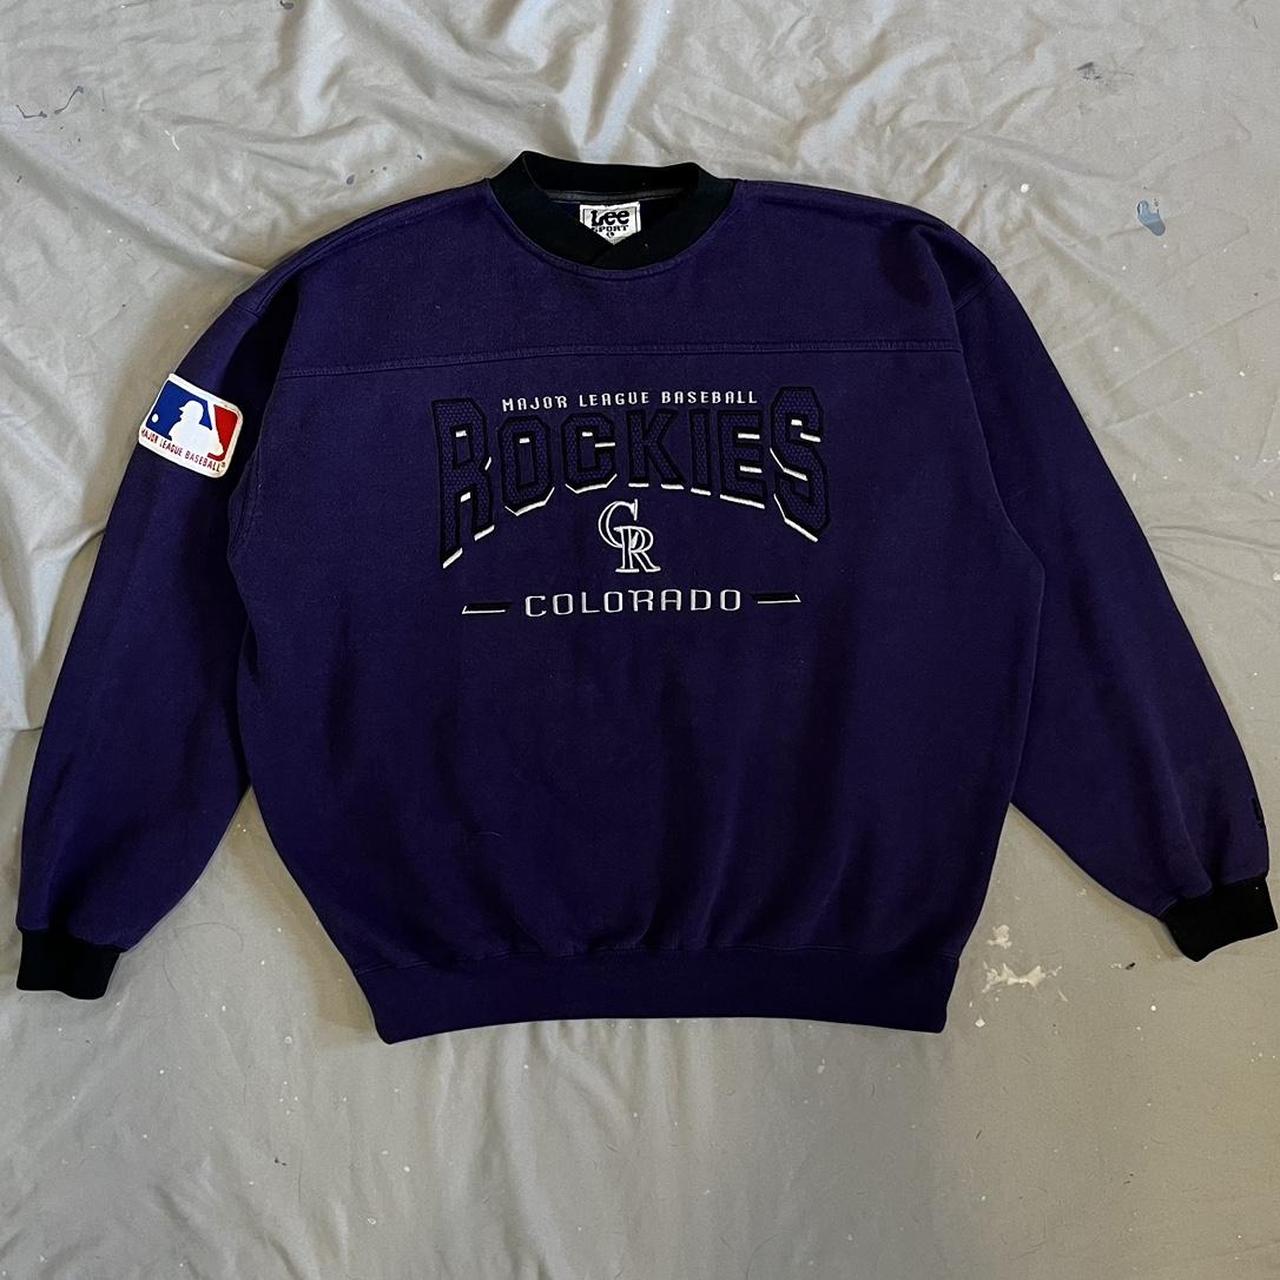 item listed by colewears